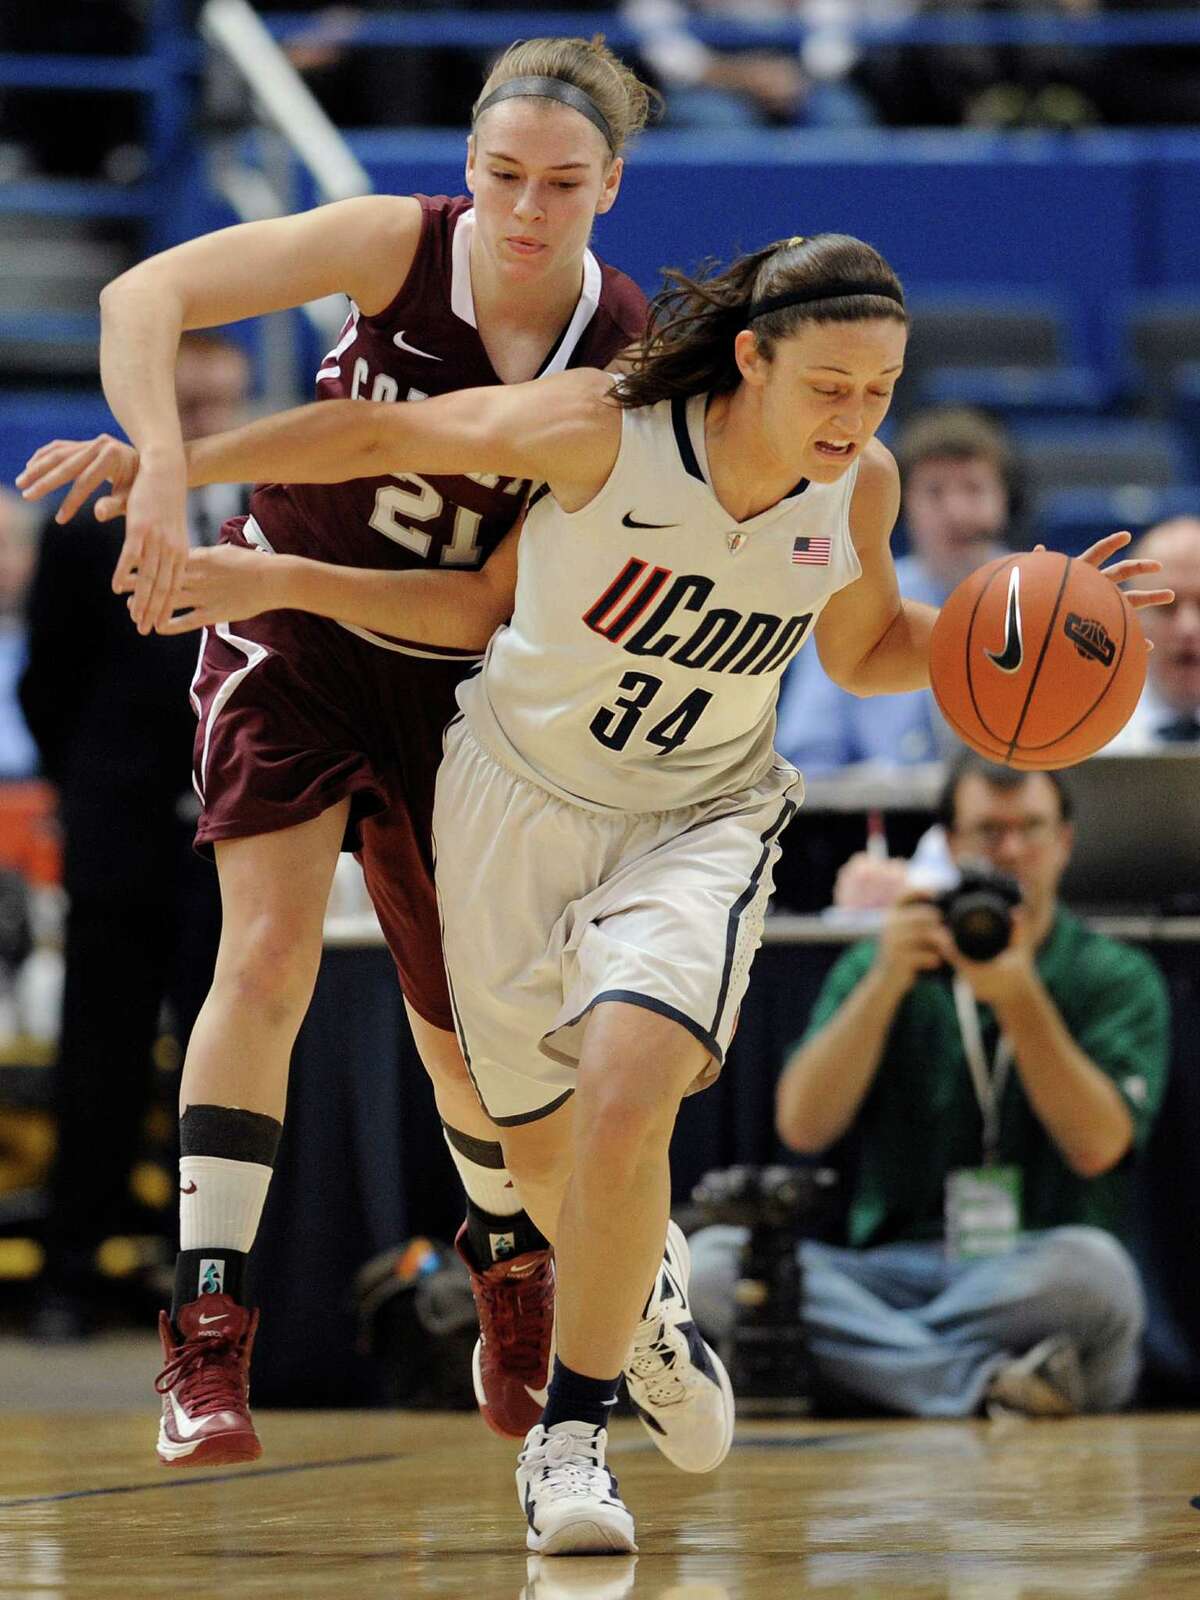 Connecticut's Kelly Faris, right, intercepts a pass intended for Colgate's Missy Repoli, left, during the first half of a NCAA college basketball game in Hartford, Conn., Wednesday, Nov. 28, 2012. (AP Photo/Jessica Hill)